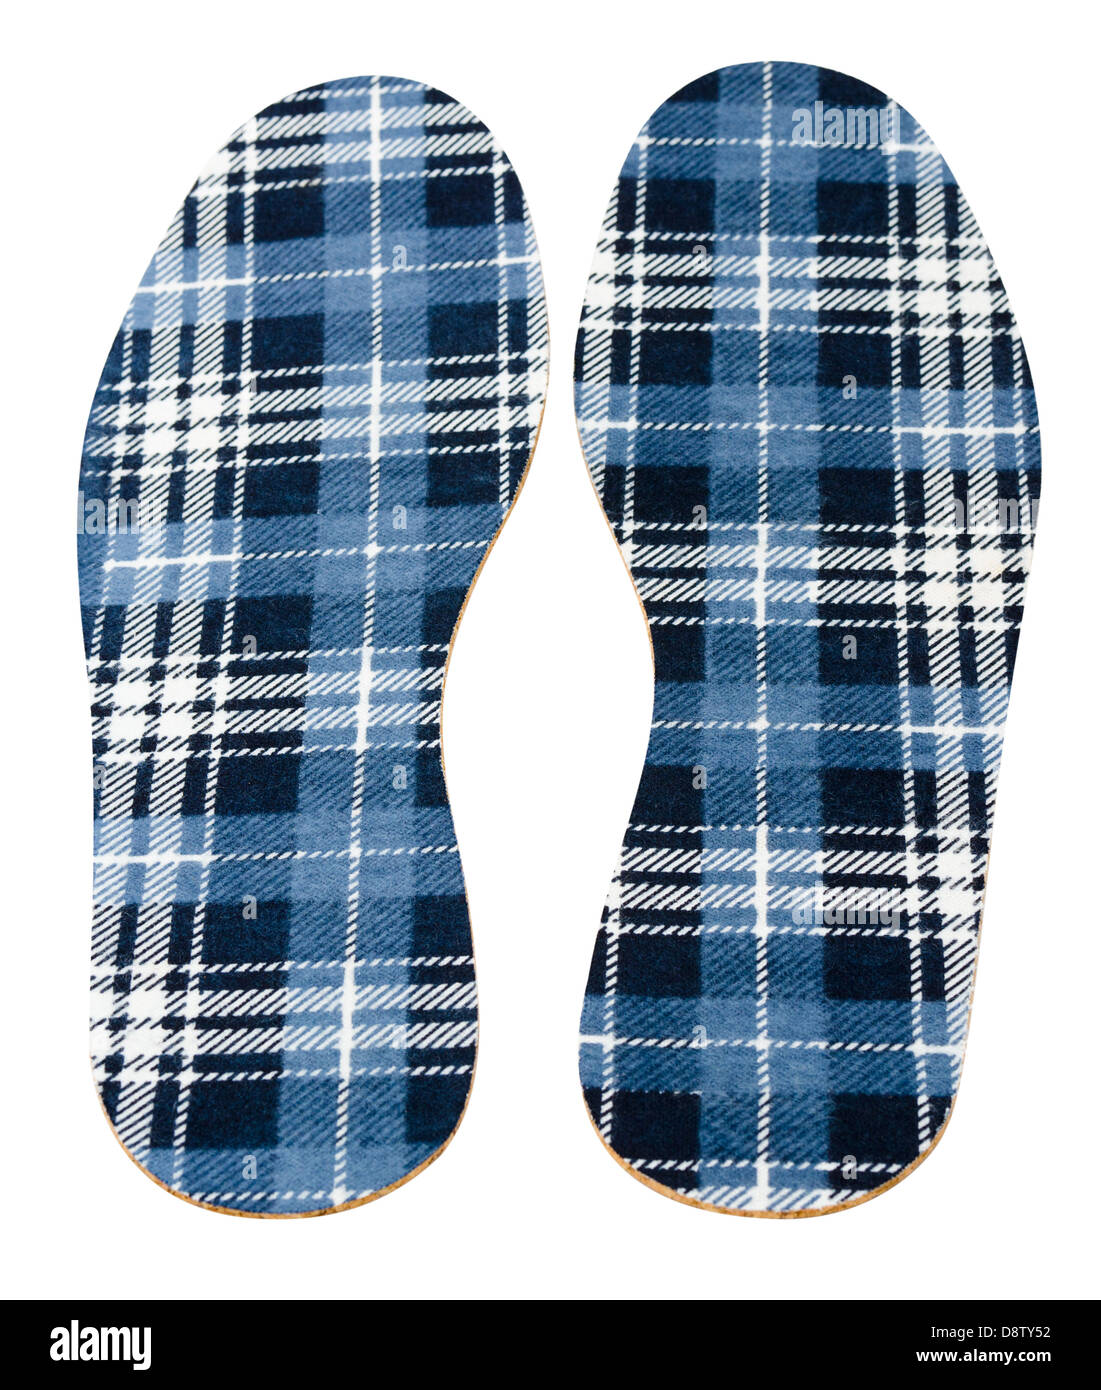 flannel insoles Stock Photo